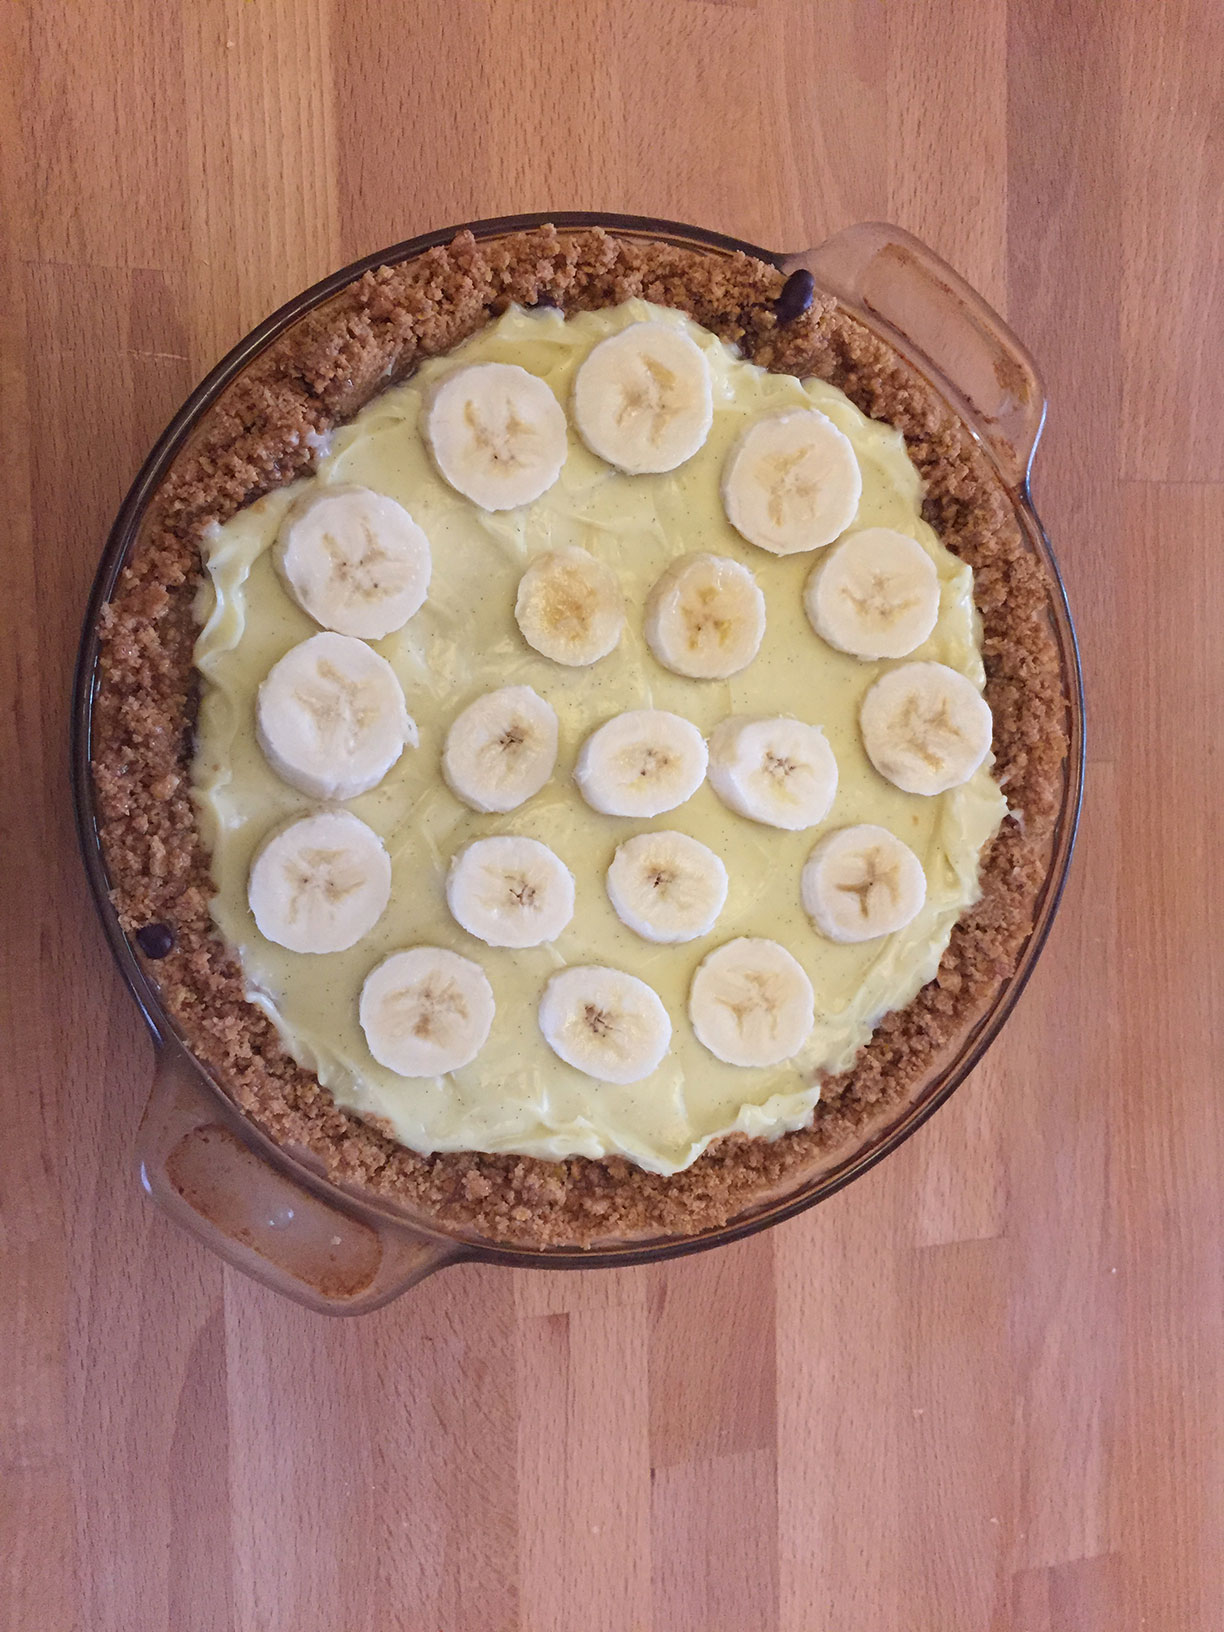 Banana cream pie, almost finished.